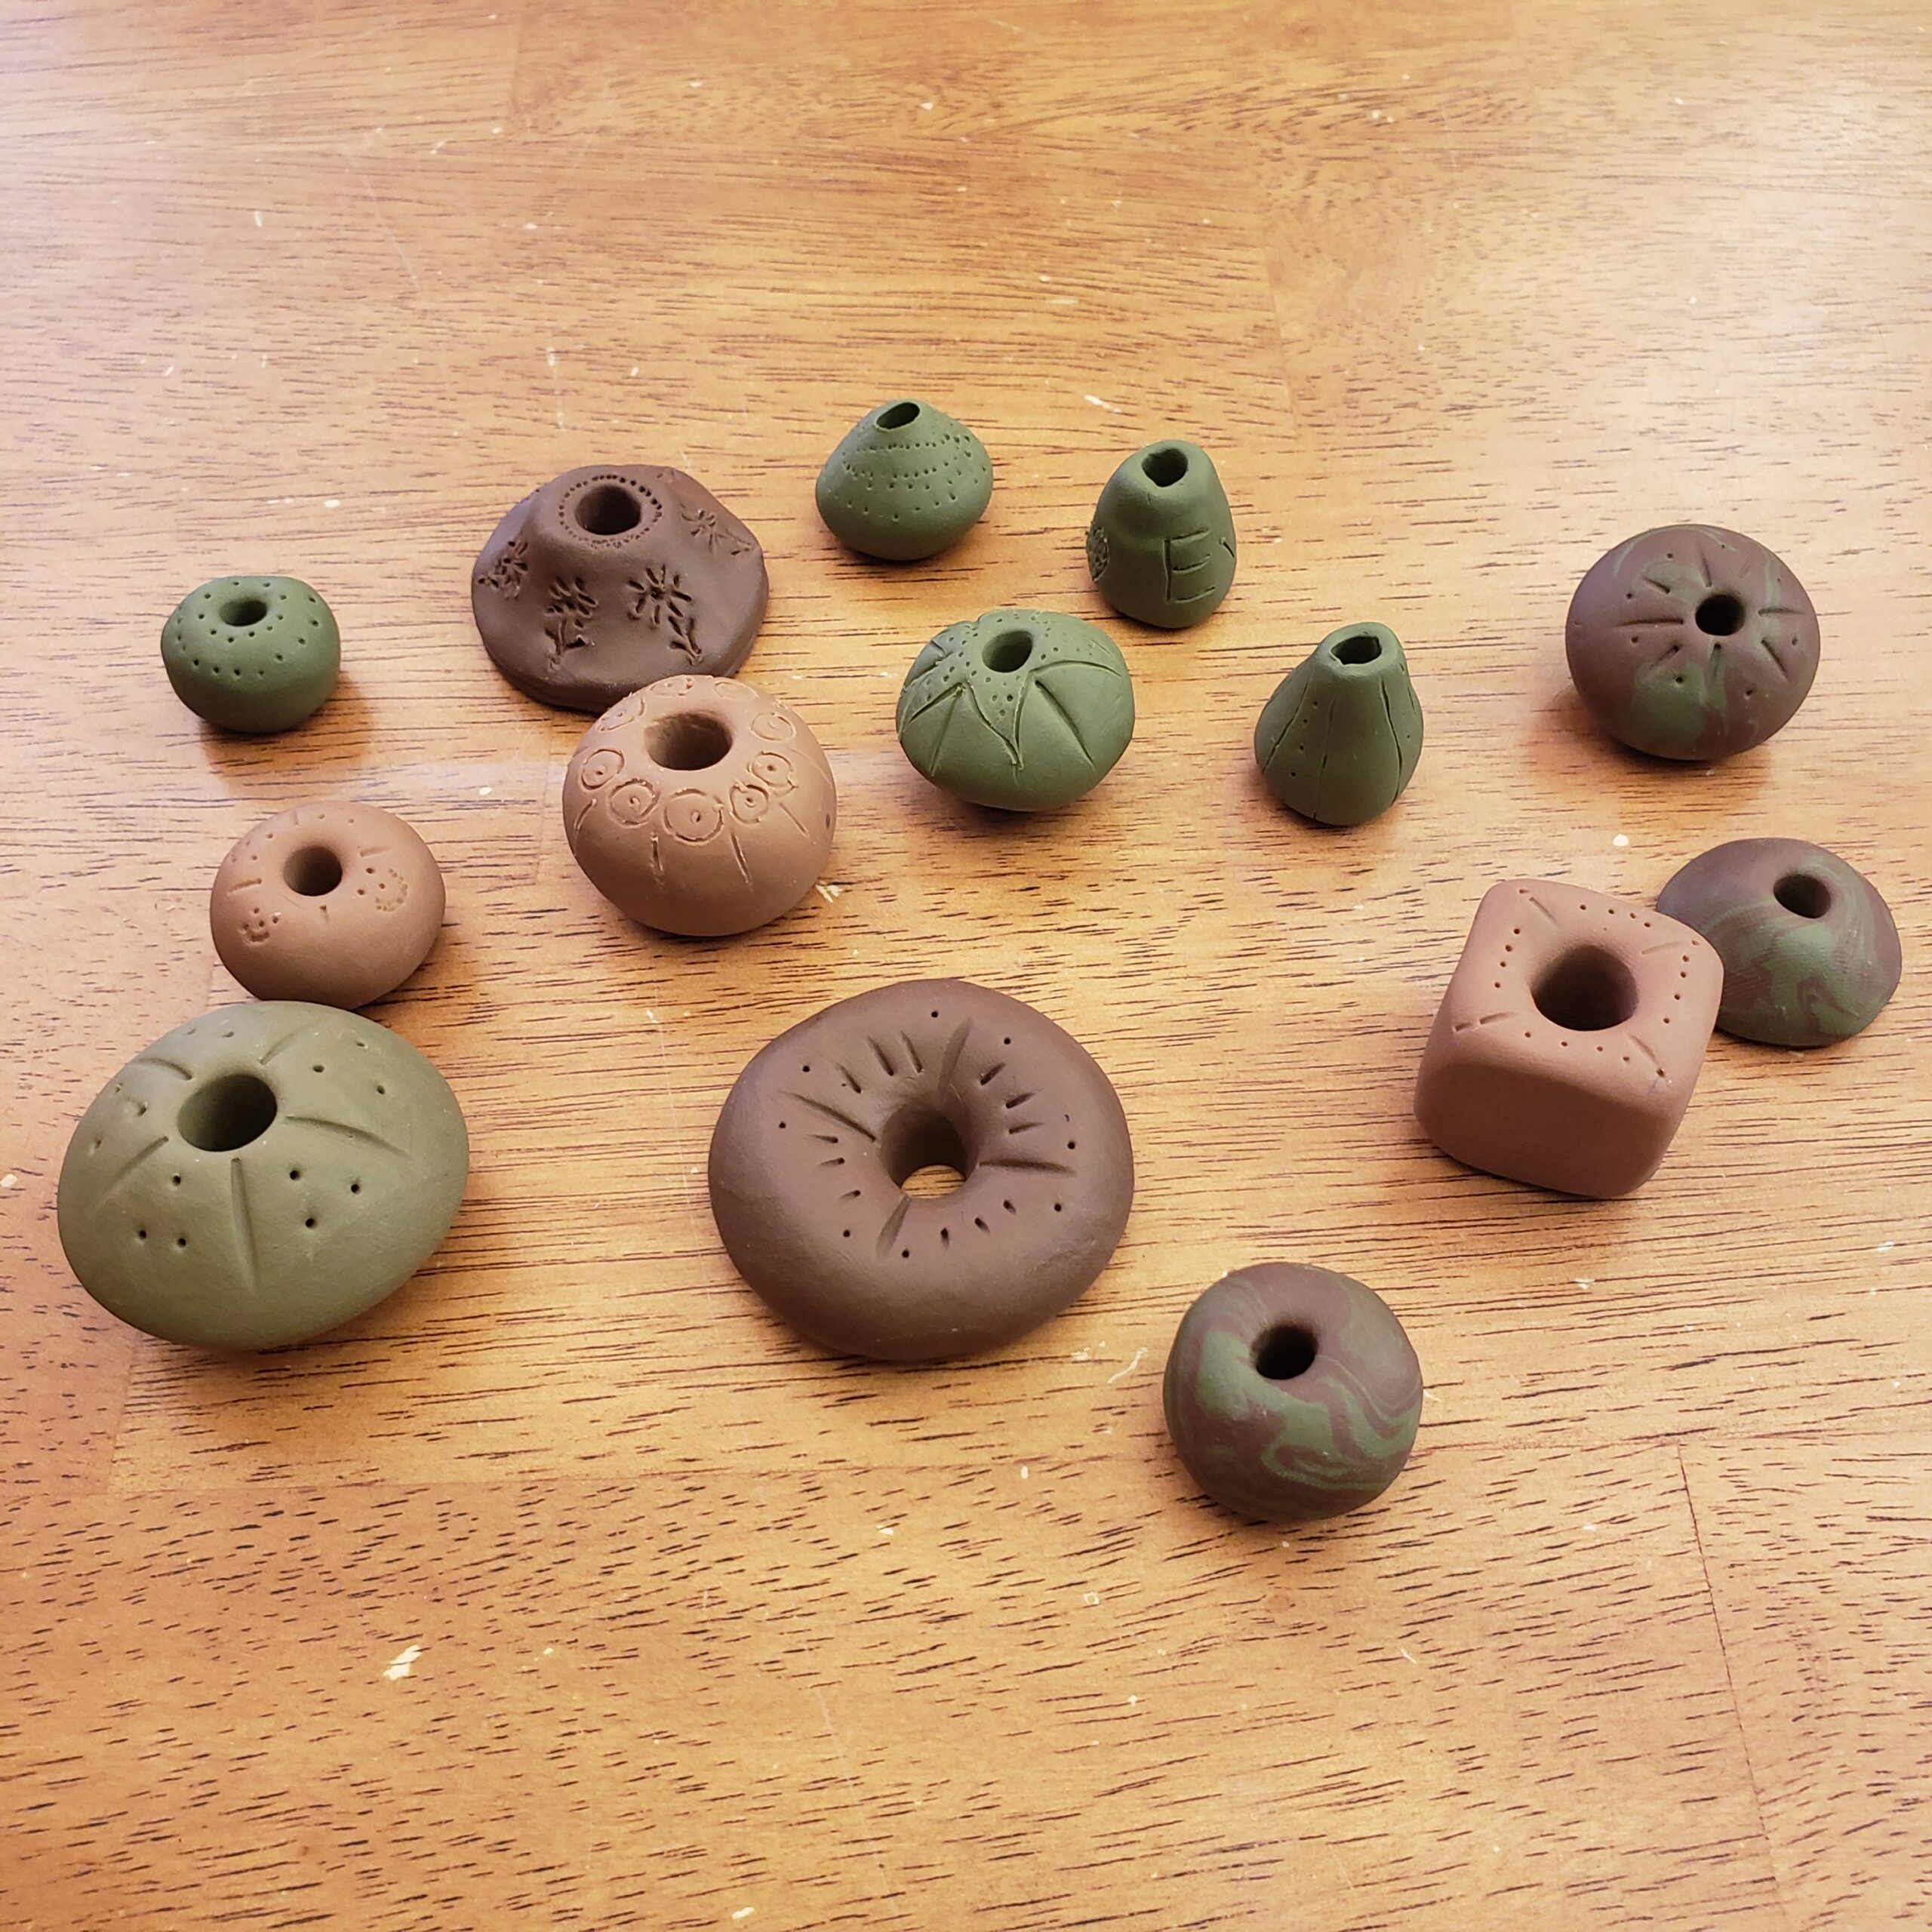 How to Make DIY Spindle Whorls from Polymer Clay